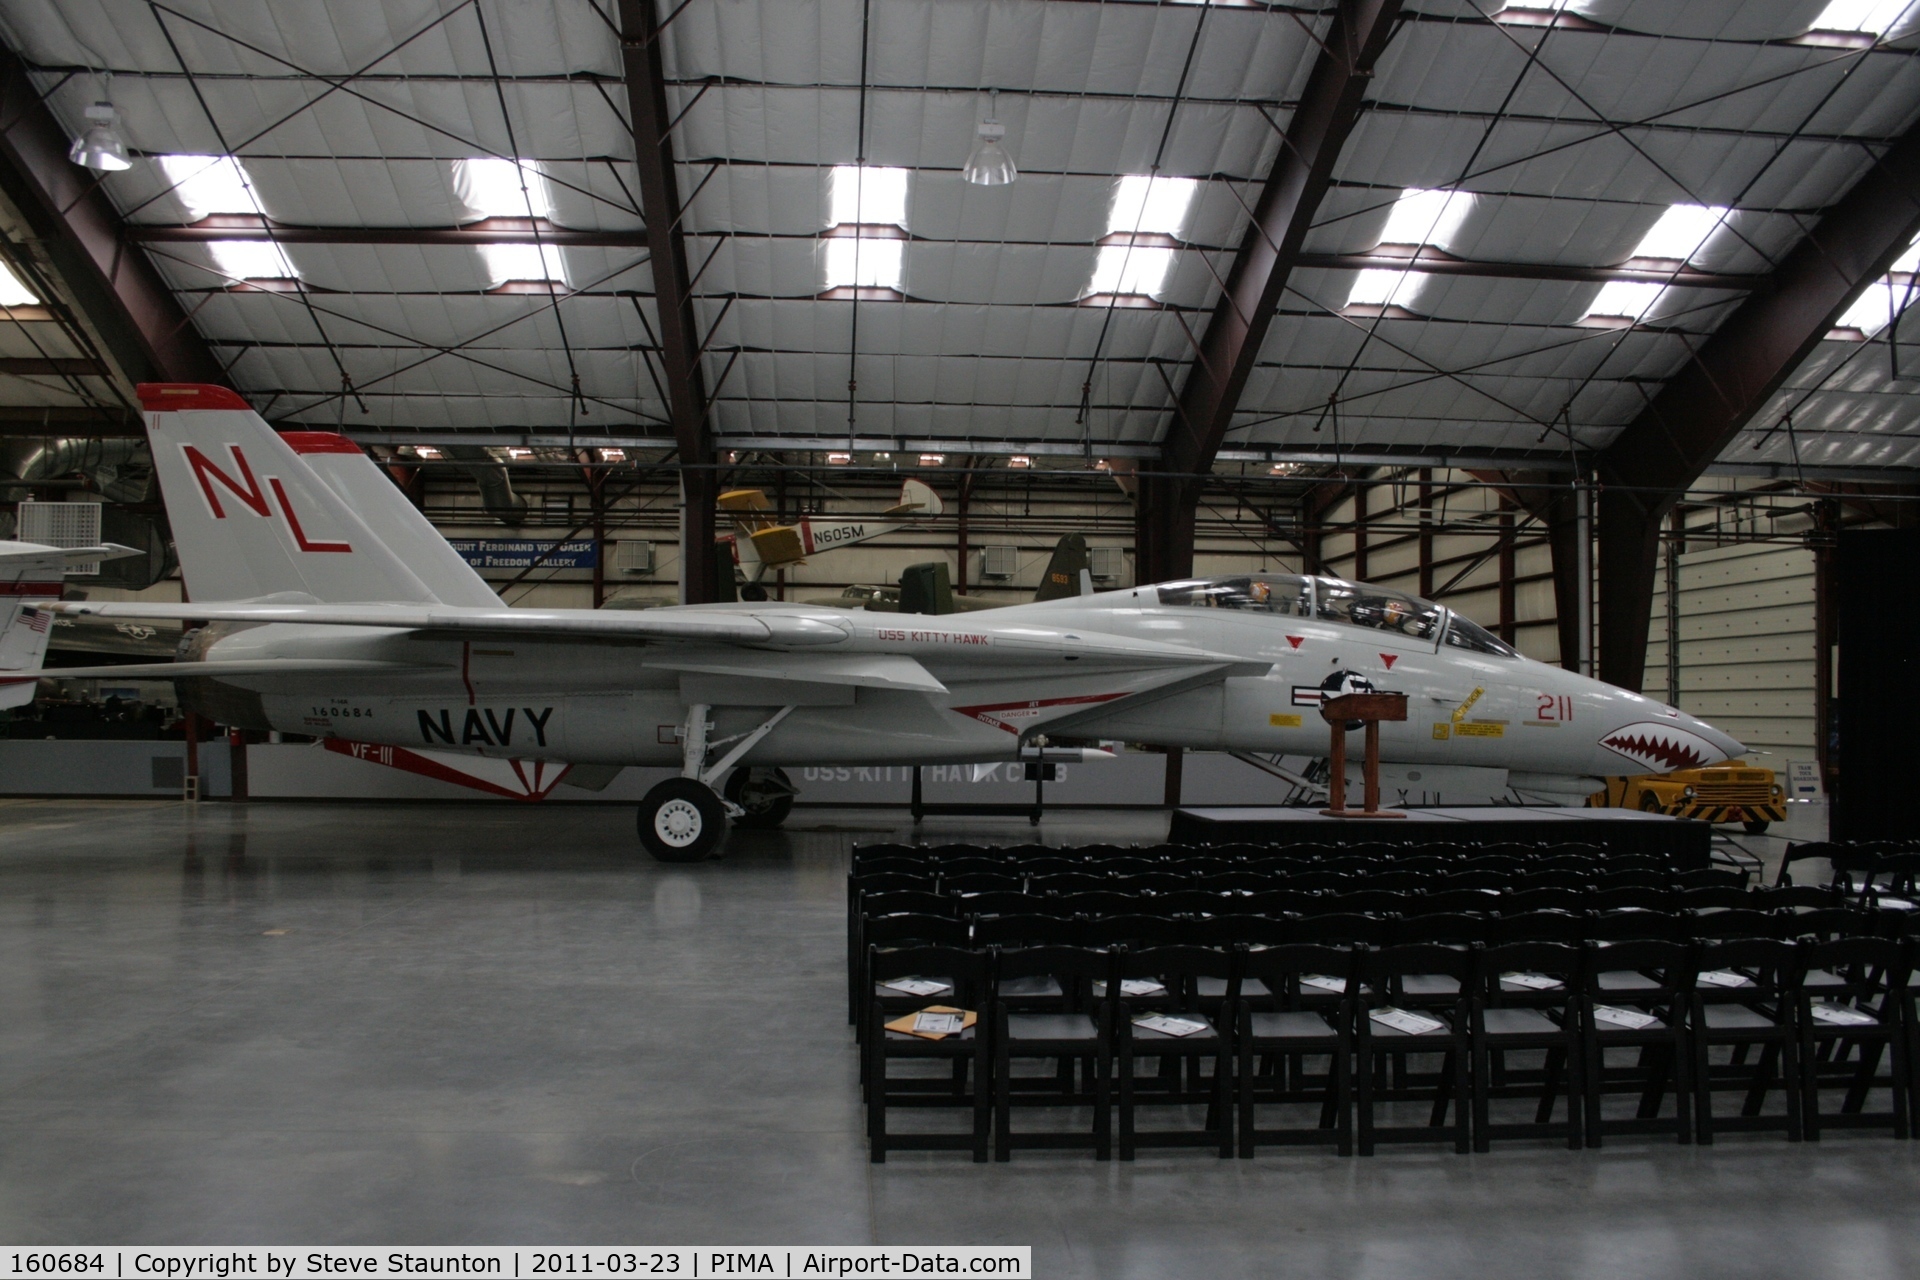 160684, Grumman F-14A Tomcat C/N 303, Taken at Pima Air and Space Museum, in March 2011 whilst on an Aeroprint Aviation tour